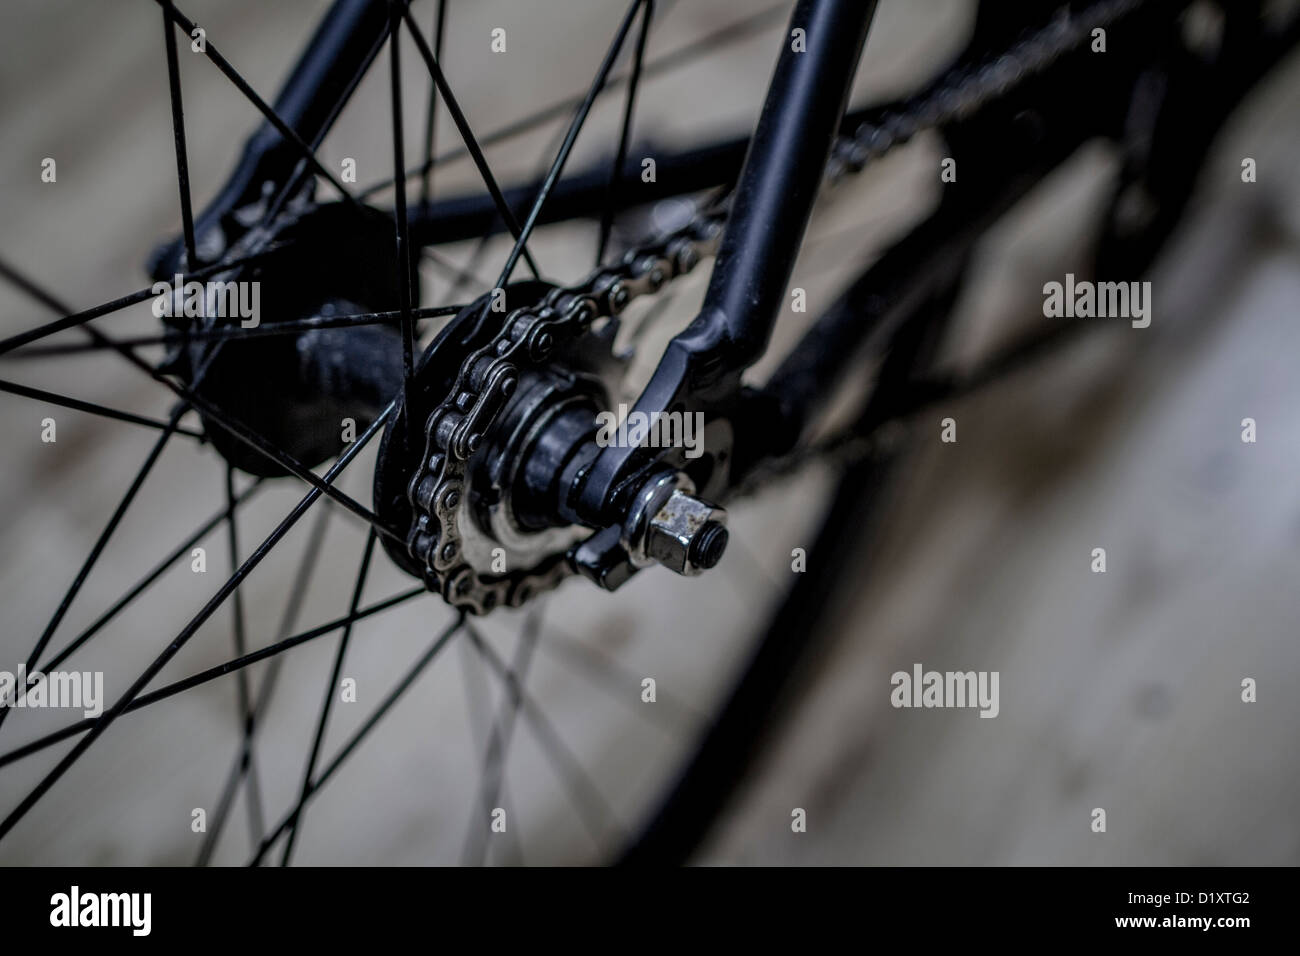 Fixie bicycle with rear sprocket detail Stock Photo